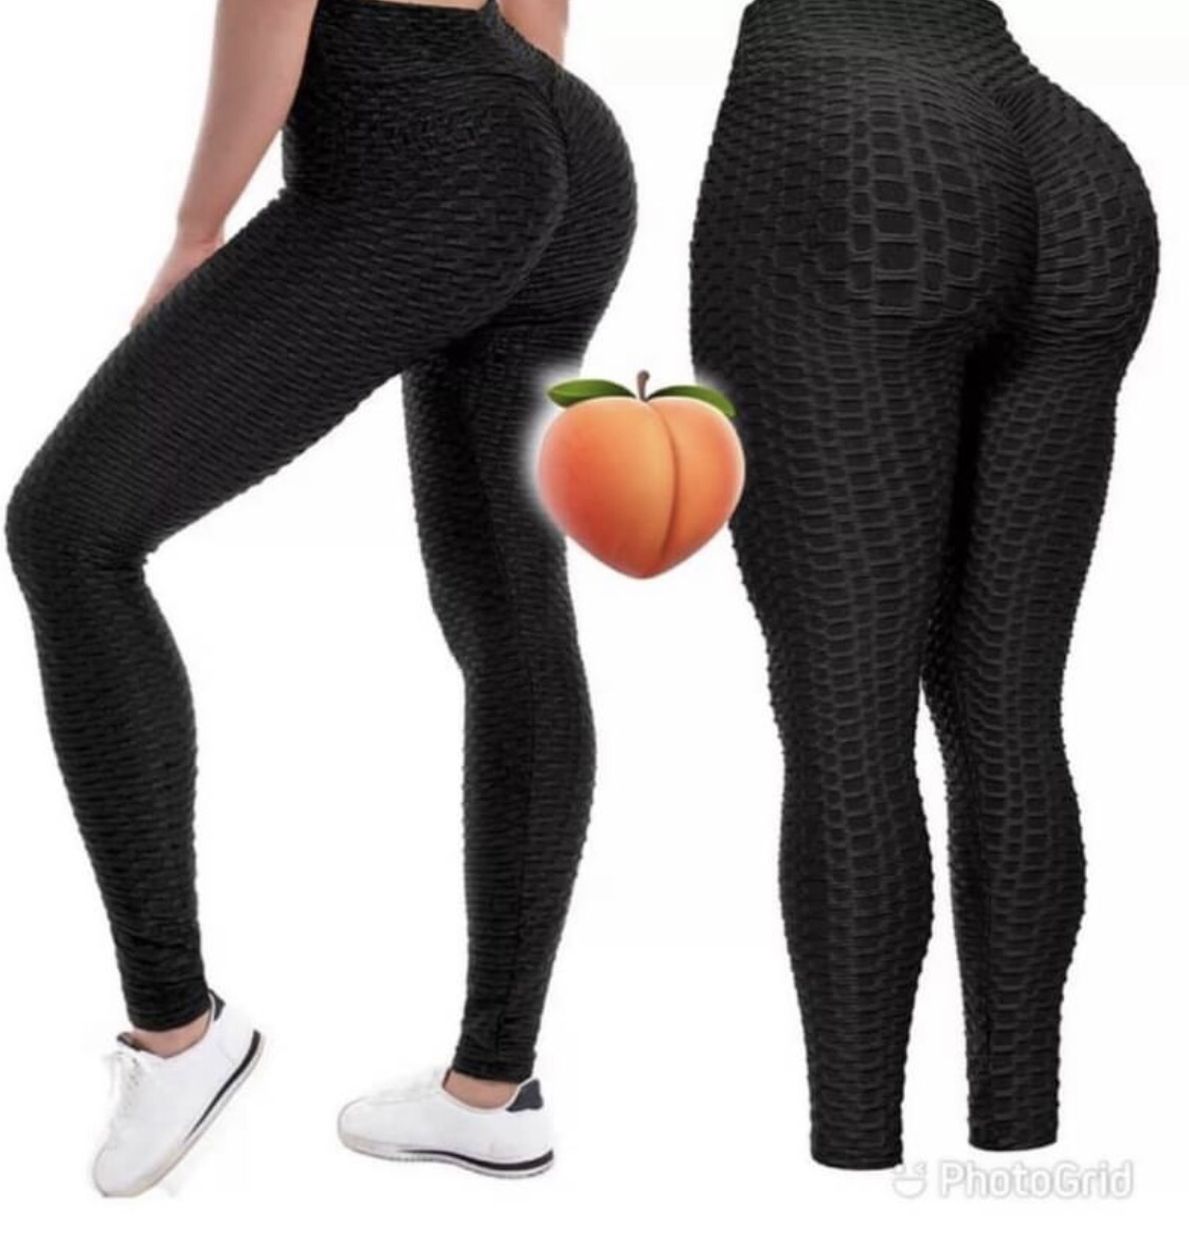 Brand New Butt lifter leggings. Available In Size XL. $20 Firm